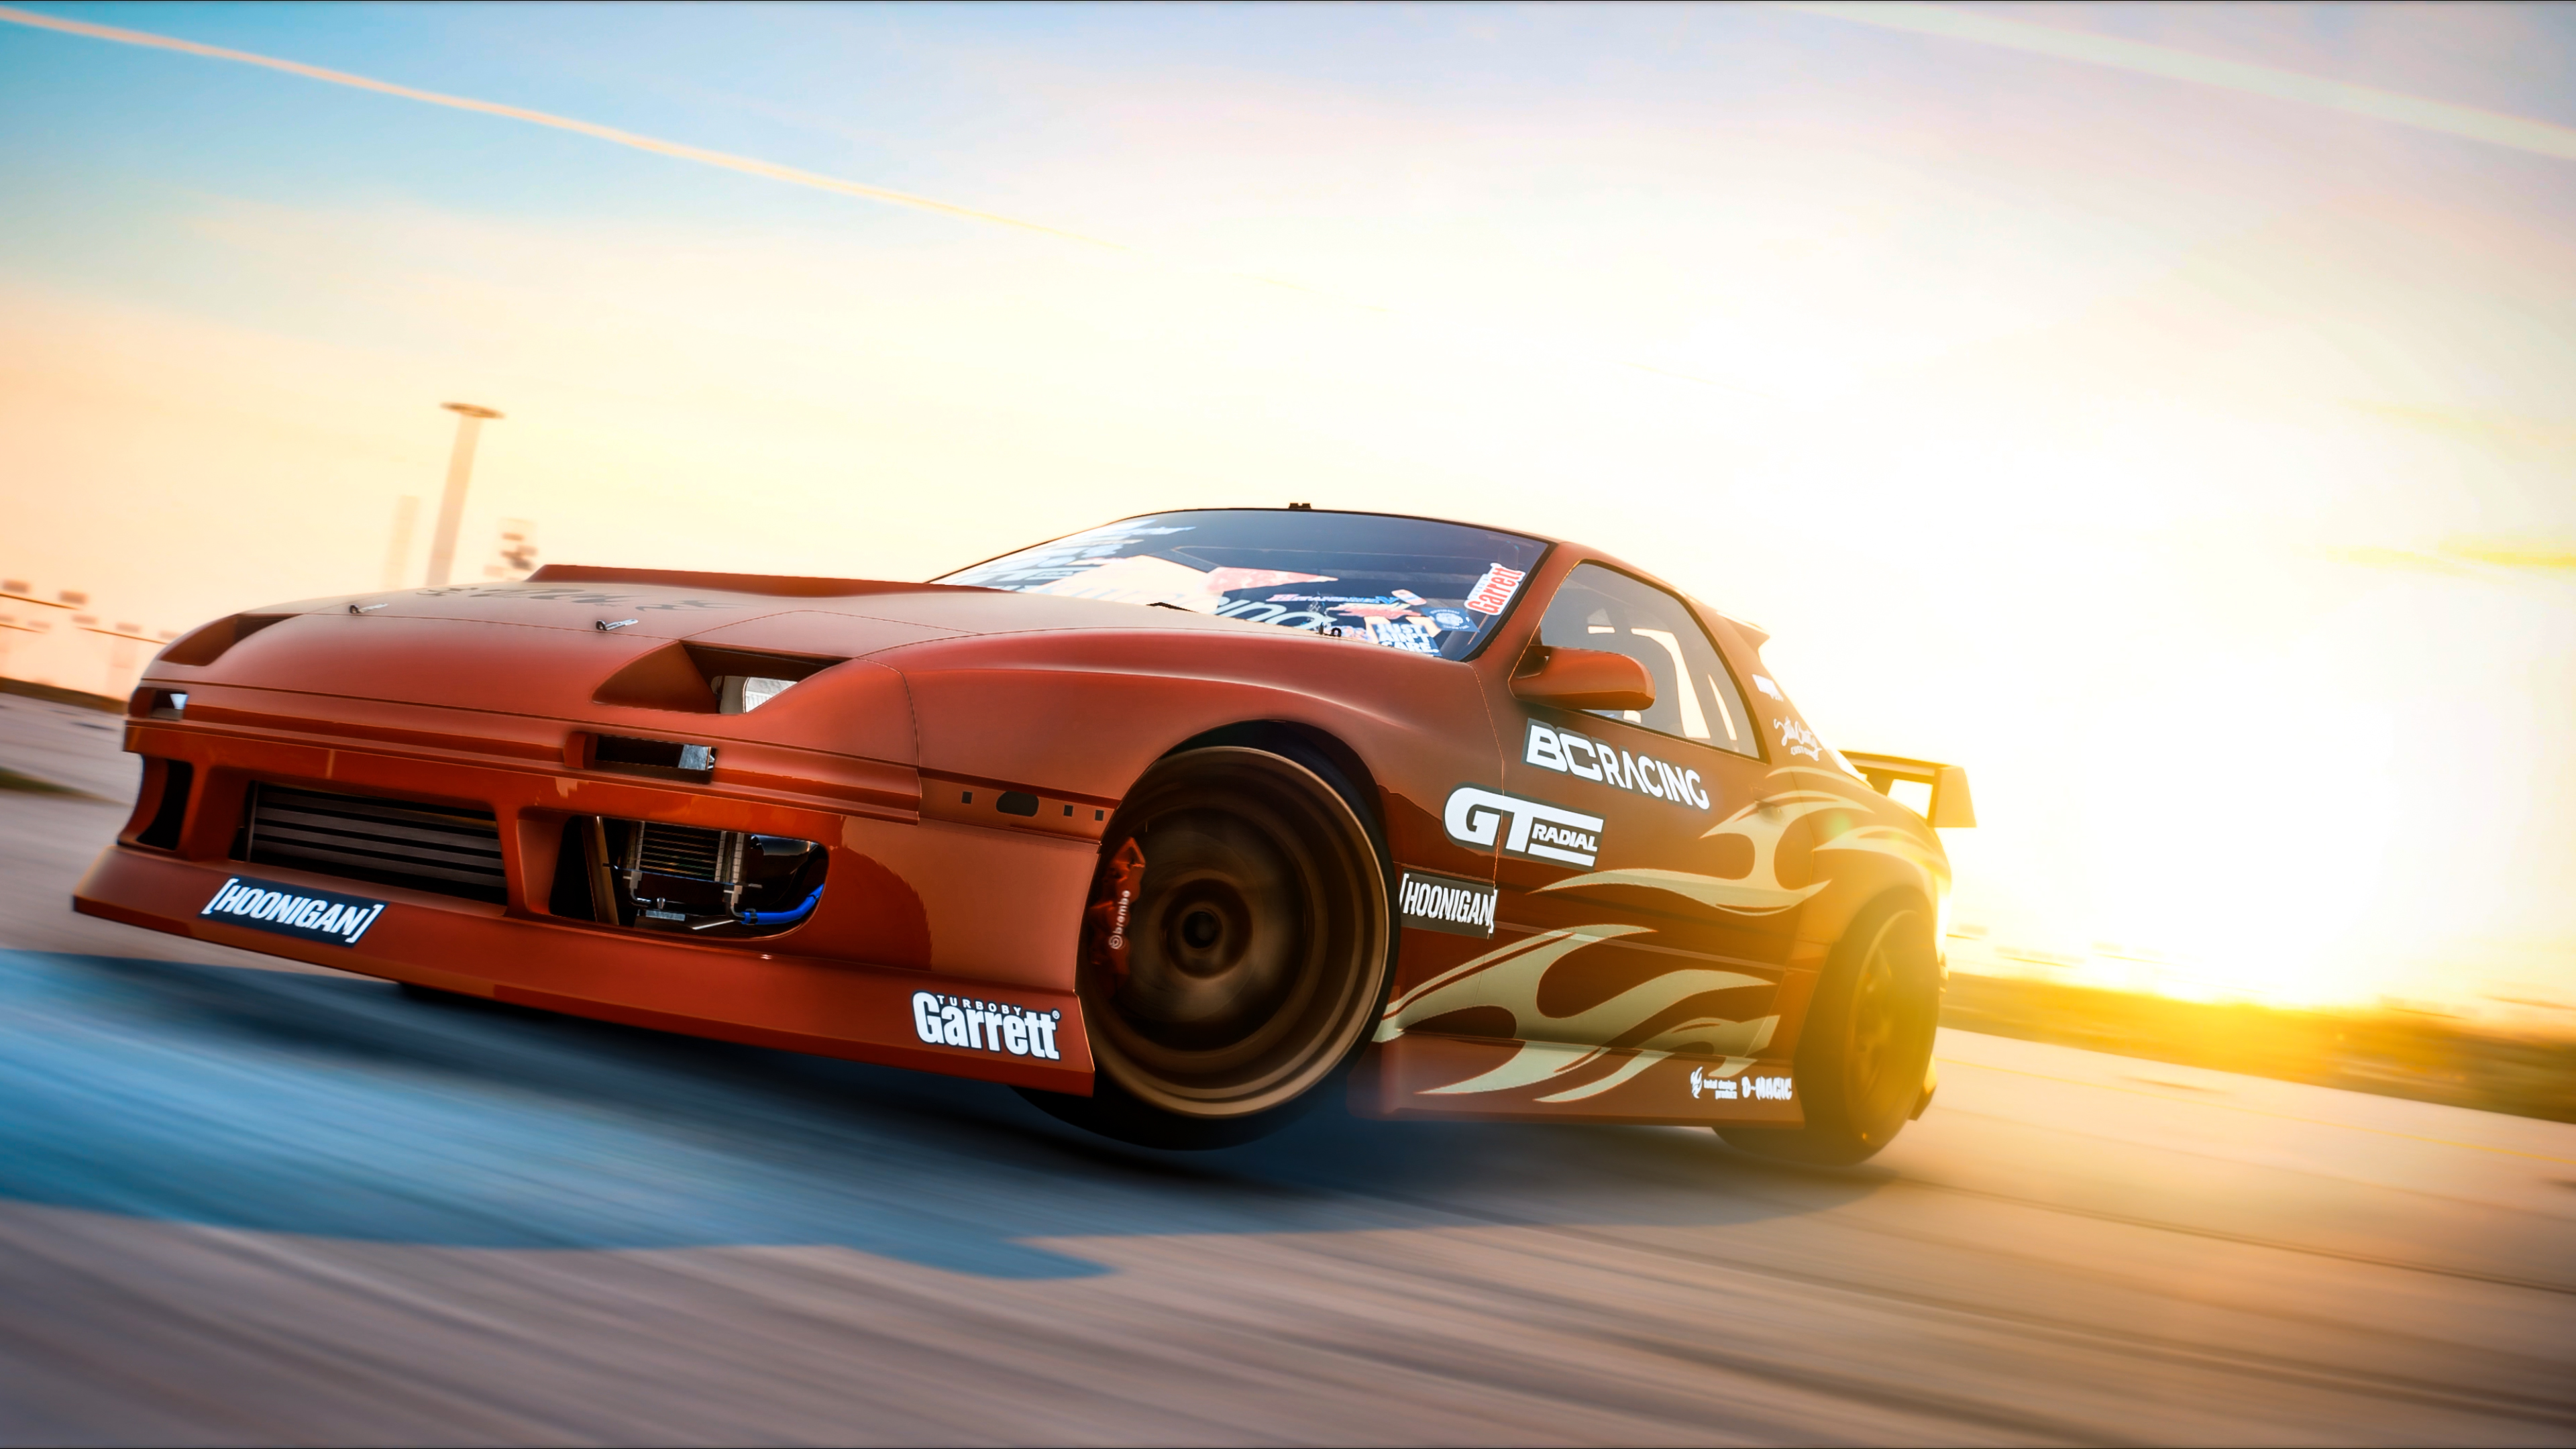 Wallpapers Drifting Cars racing red car on the desktop